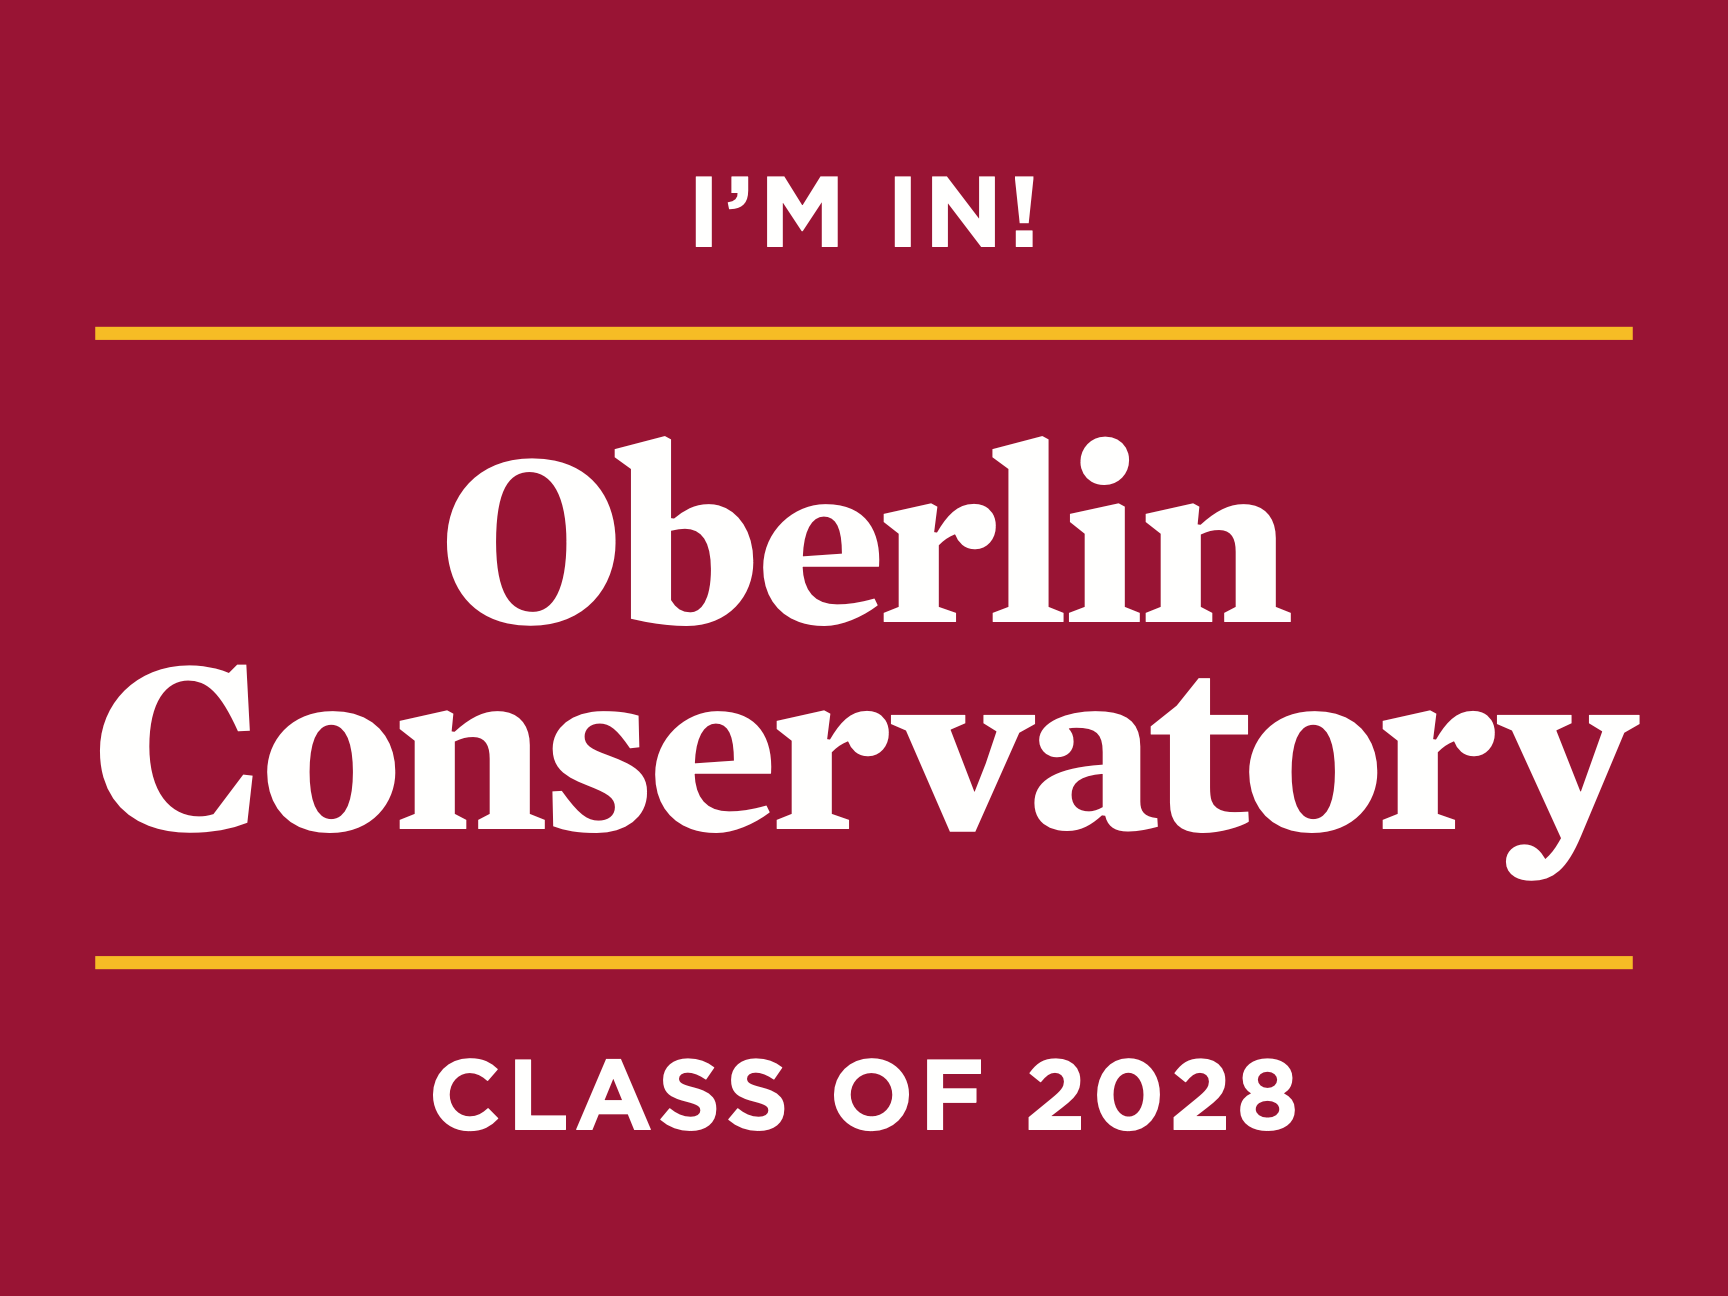 I'm in! Oberlin Conservatory Class of 2028 on dark red background.